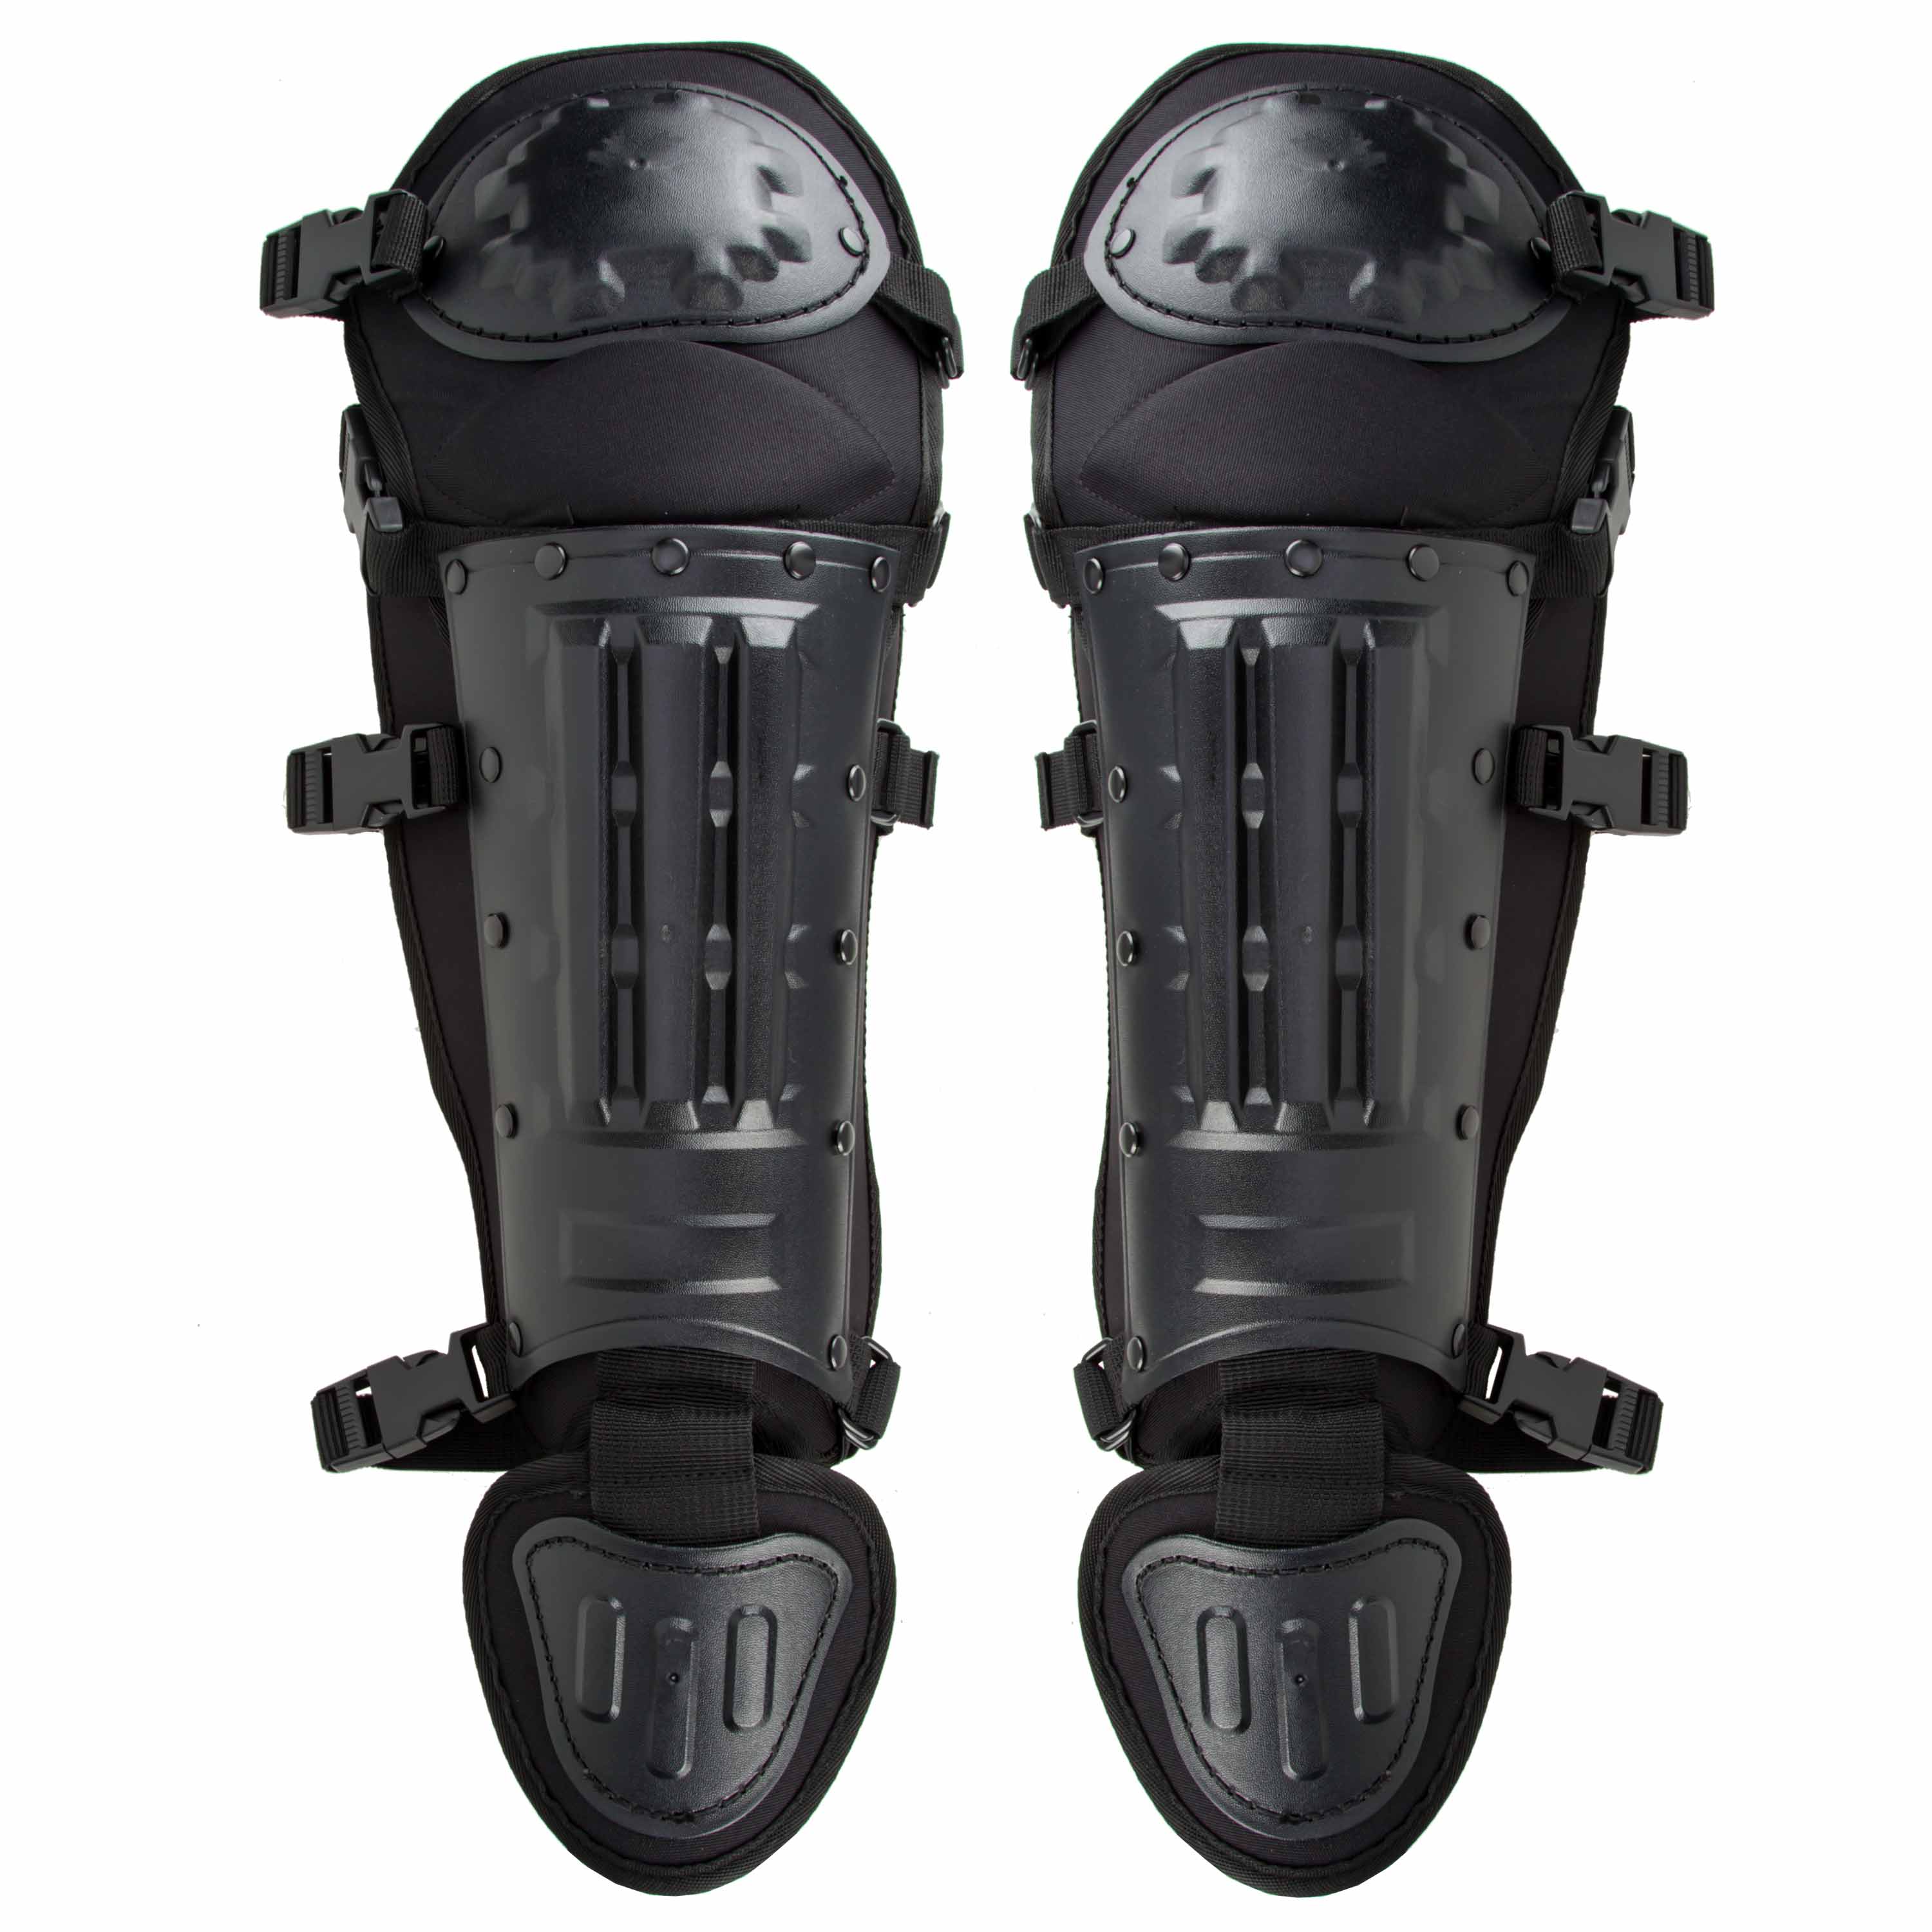 Us Police Protecop Shin Guard's Protège-tibias Taille Universelle Police 1 Paire